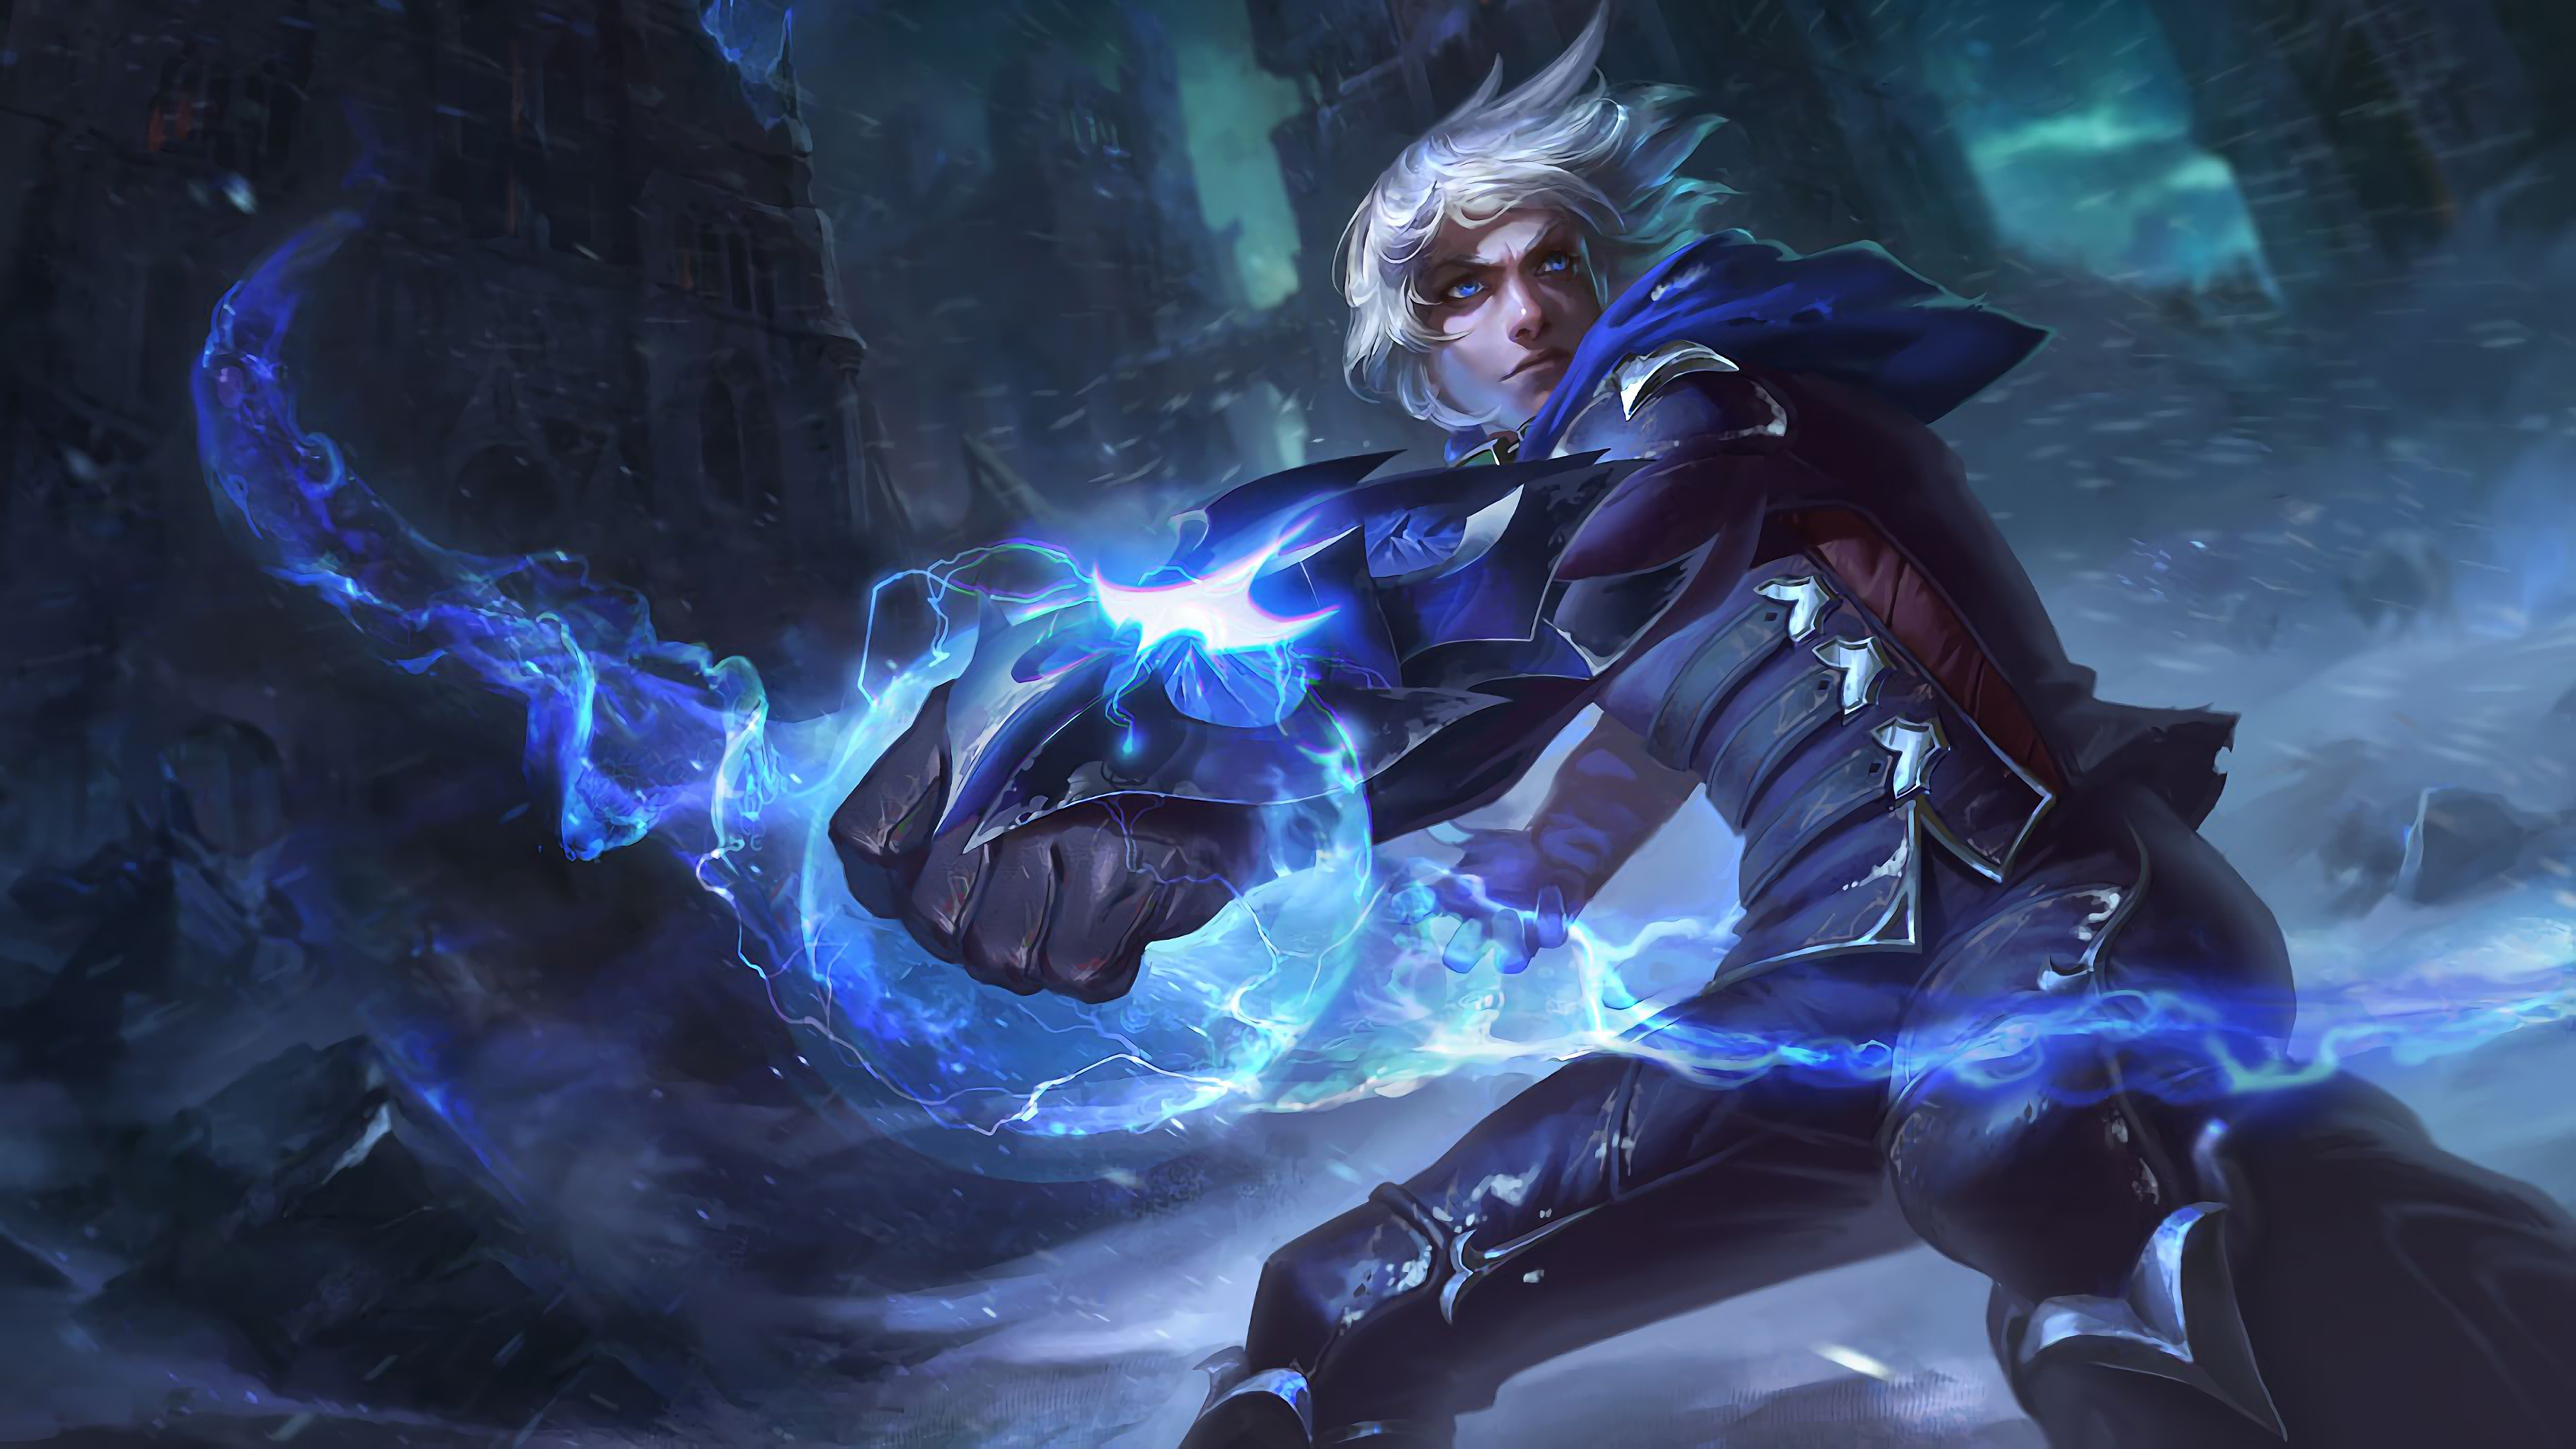 frosted ezreal new spash art rework update skin league of legends lol lol 1574104233 - Frosted Ezreal New Spash Art Rework Update Skin League of Legends LoL lol - league of legends, Ezreal